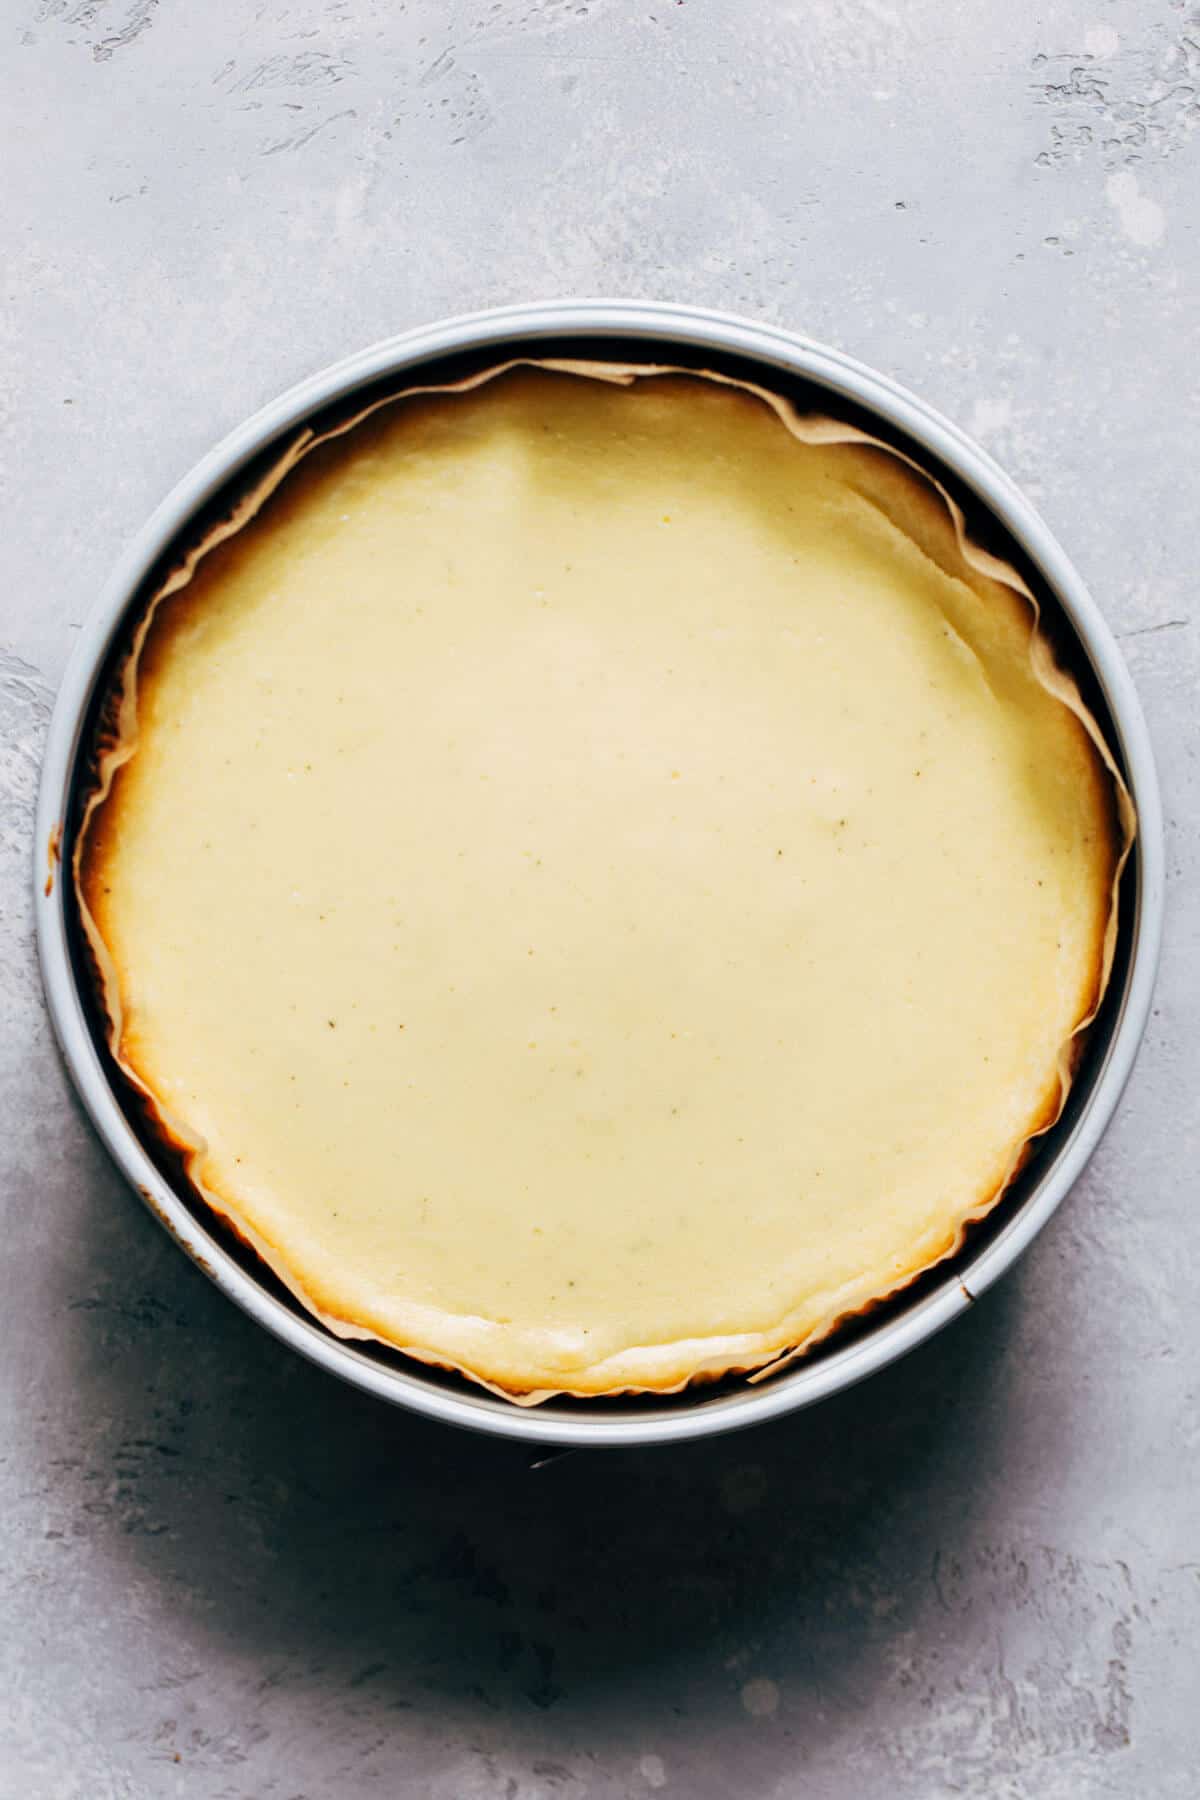 a freshly baked cheesecake still in the pan